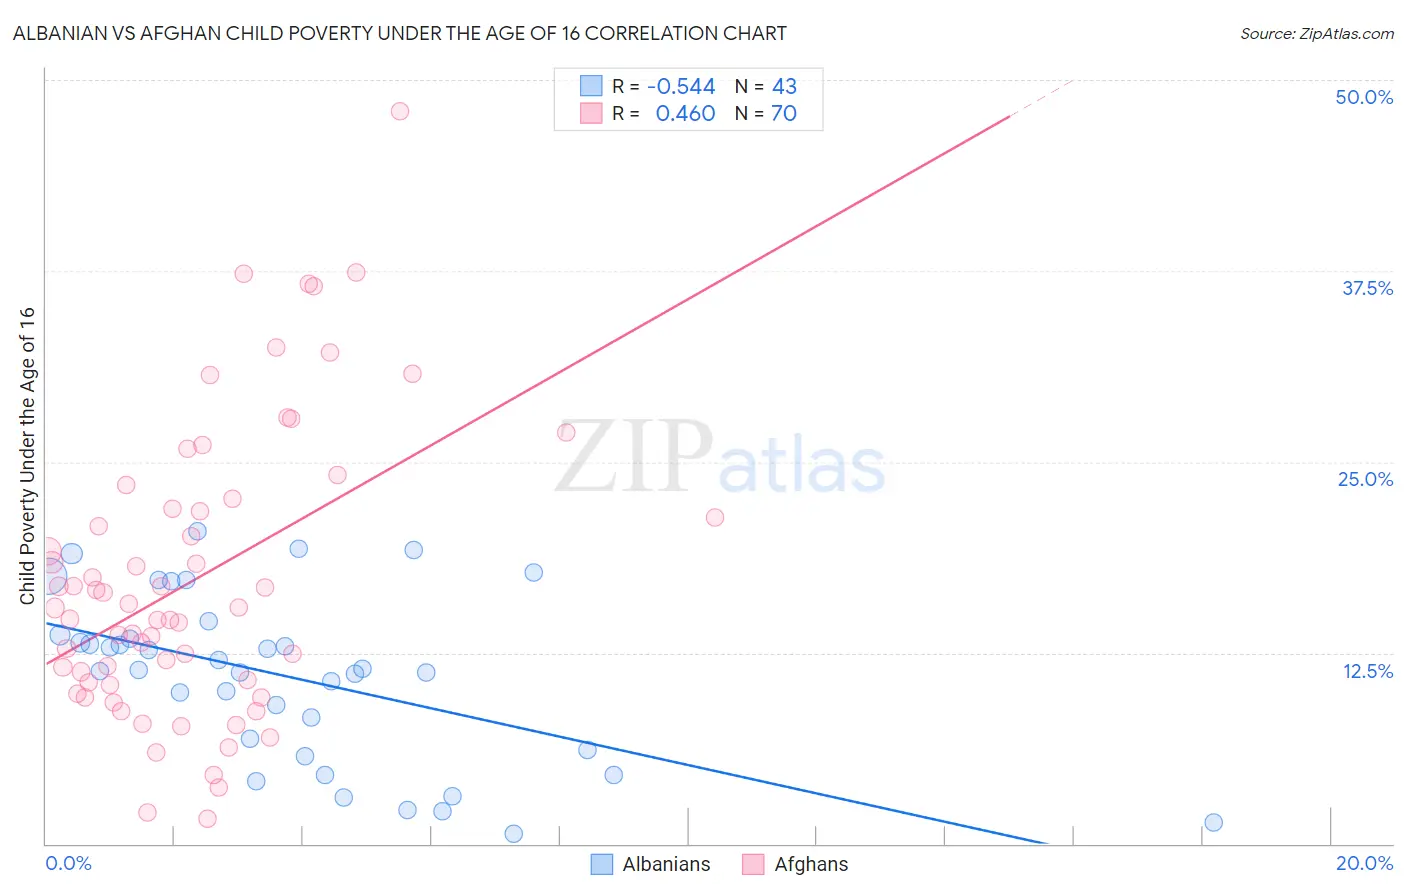 Albanian vs Afghan Child Poverty Under the Age of 16